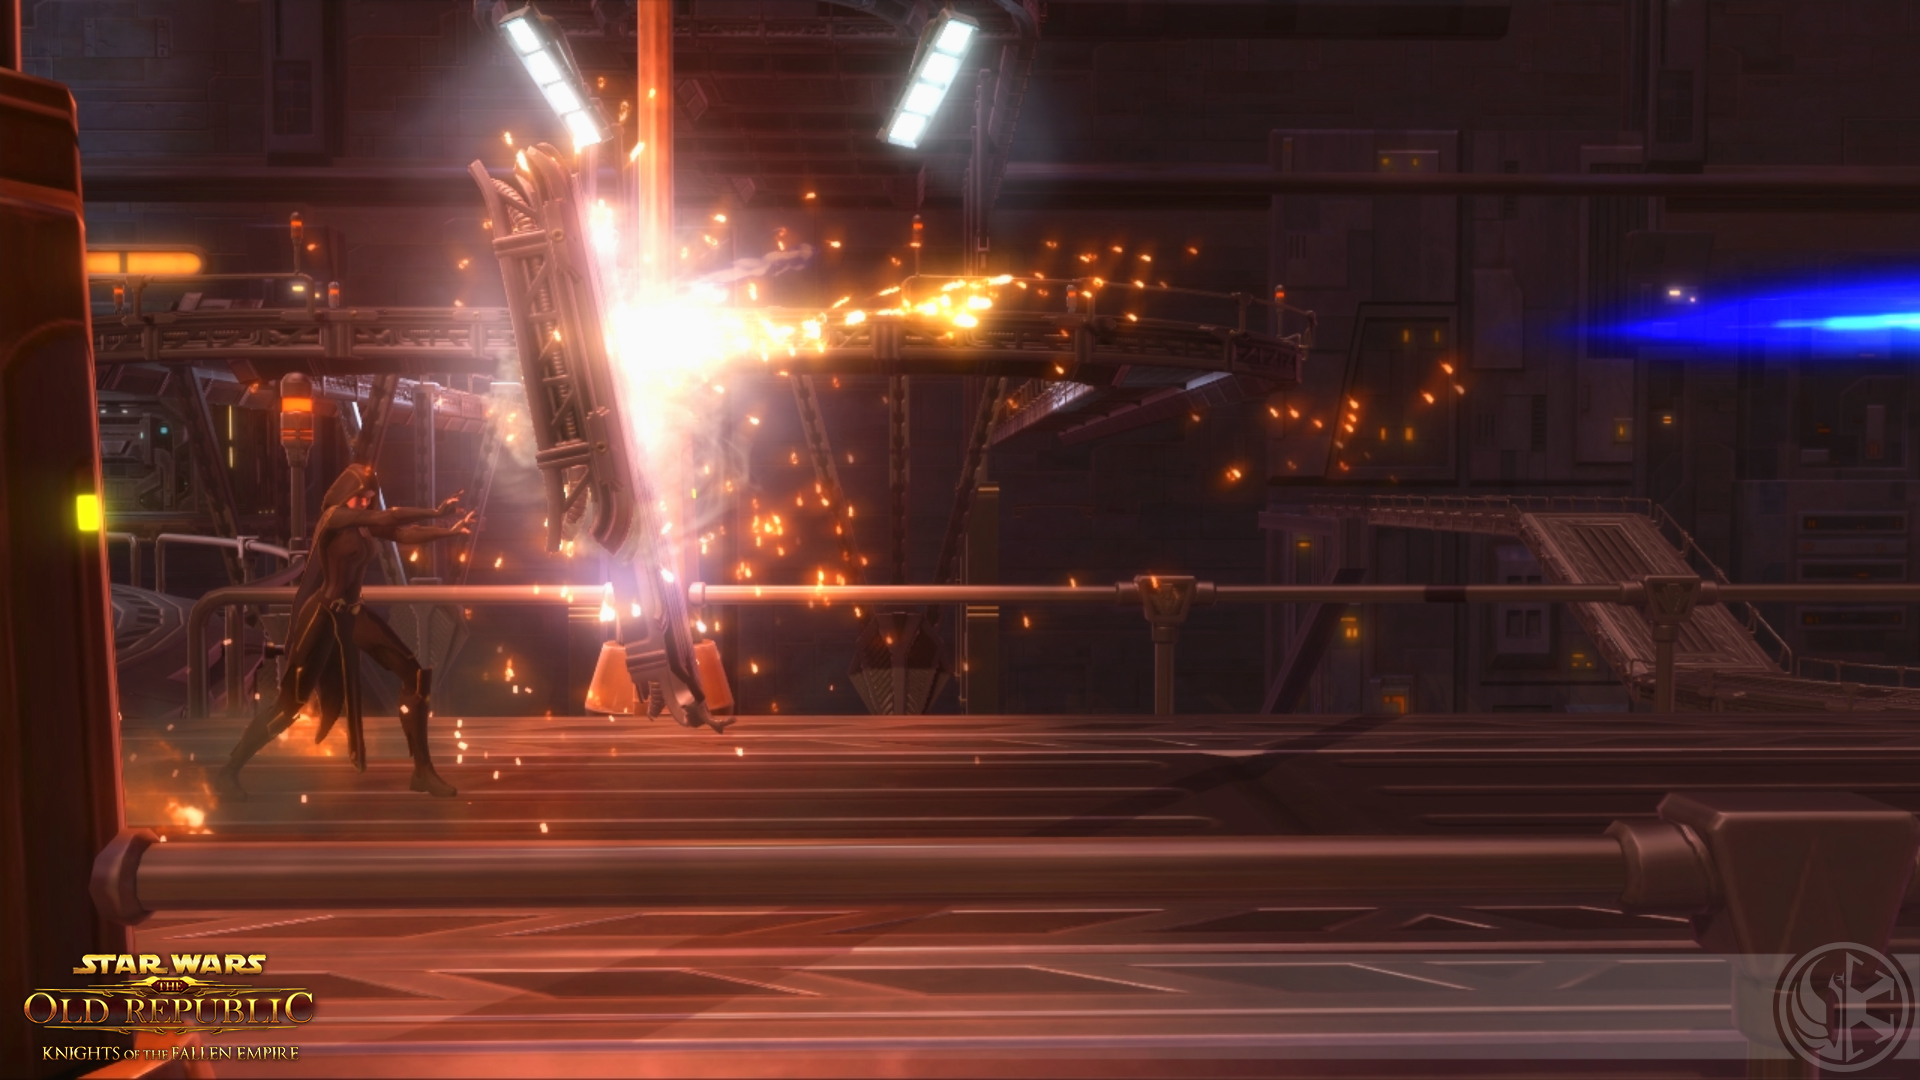 Star Wars The Old Republic Knights of the Fallen Empire Screenshot 002